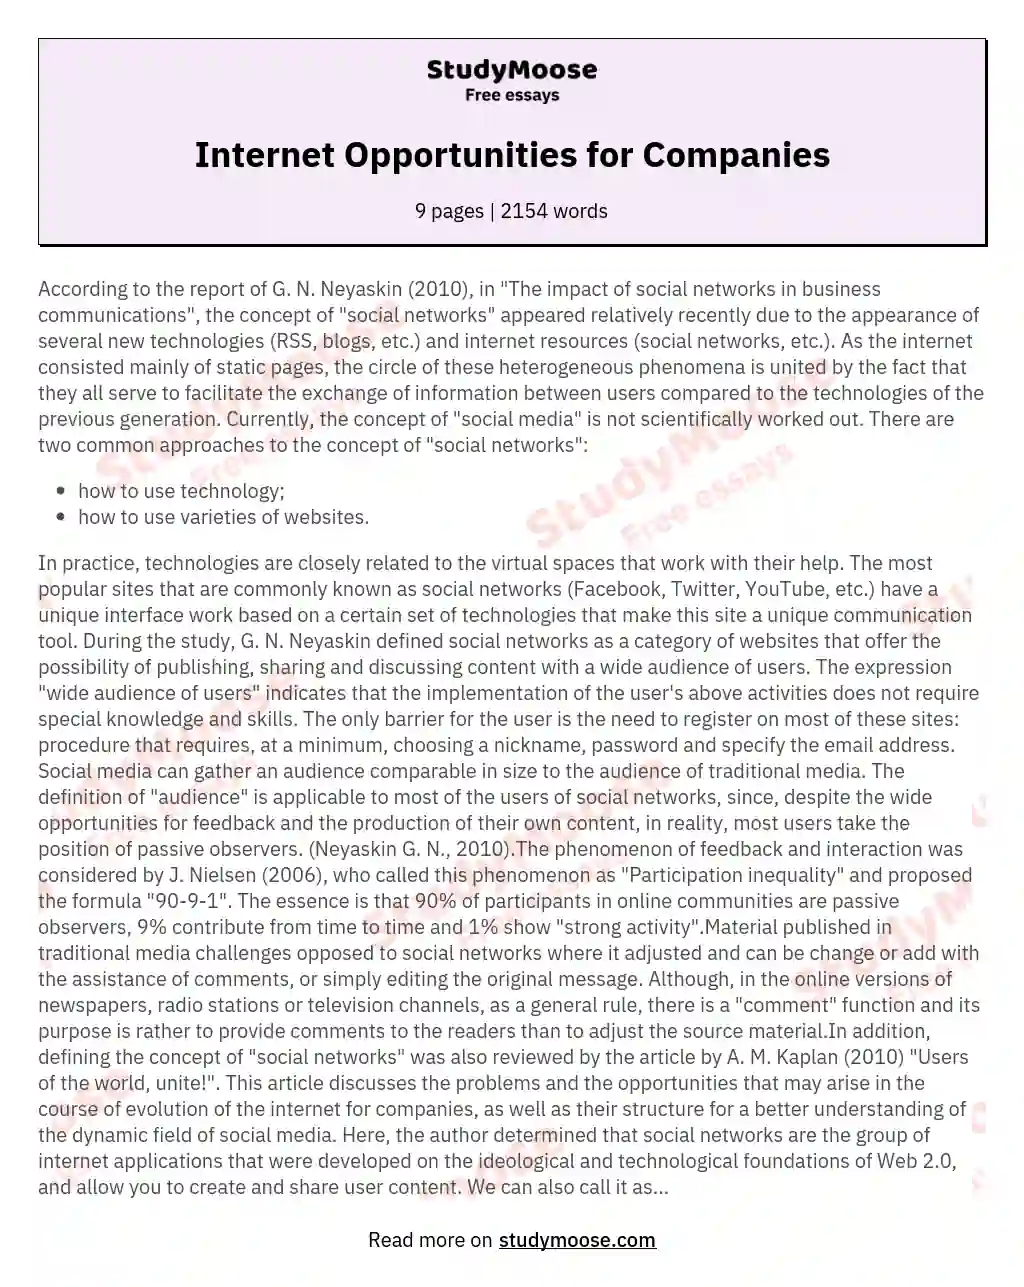 Internet Opportunities for Companies essay